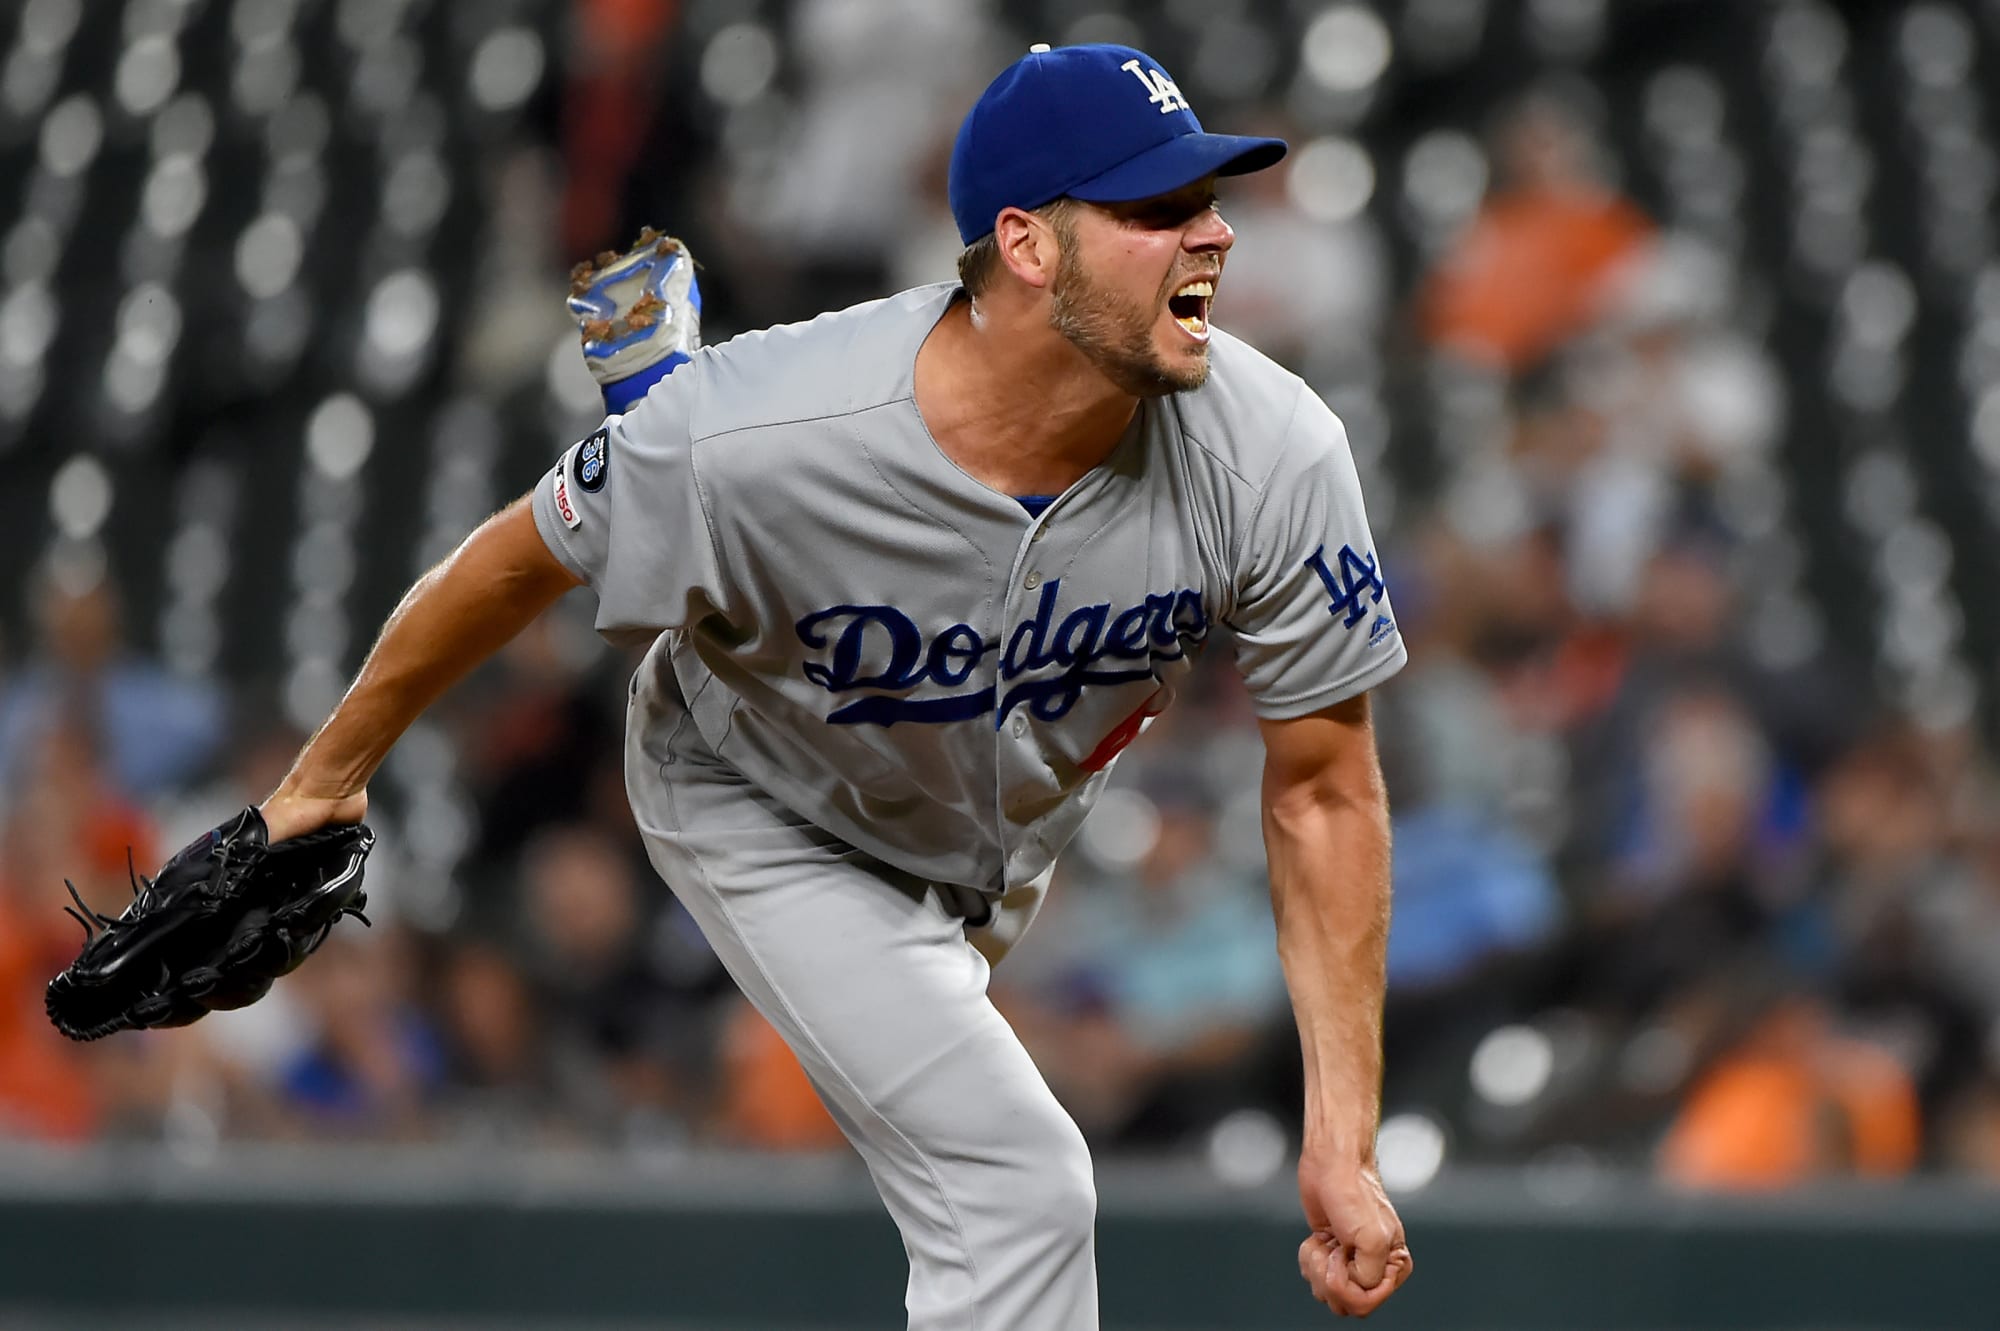 Dodgers: What to look for from Rich Hill's final two starts